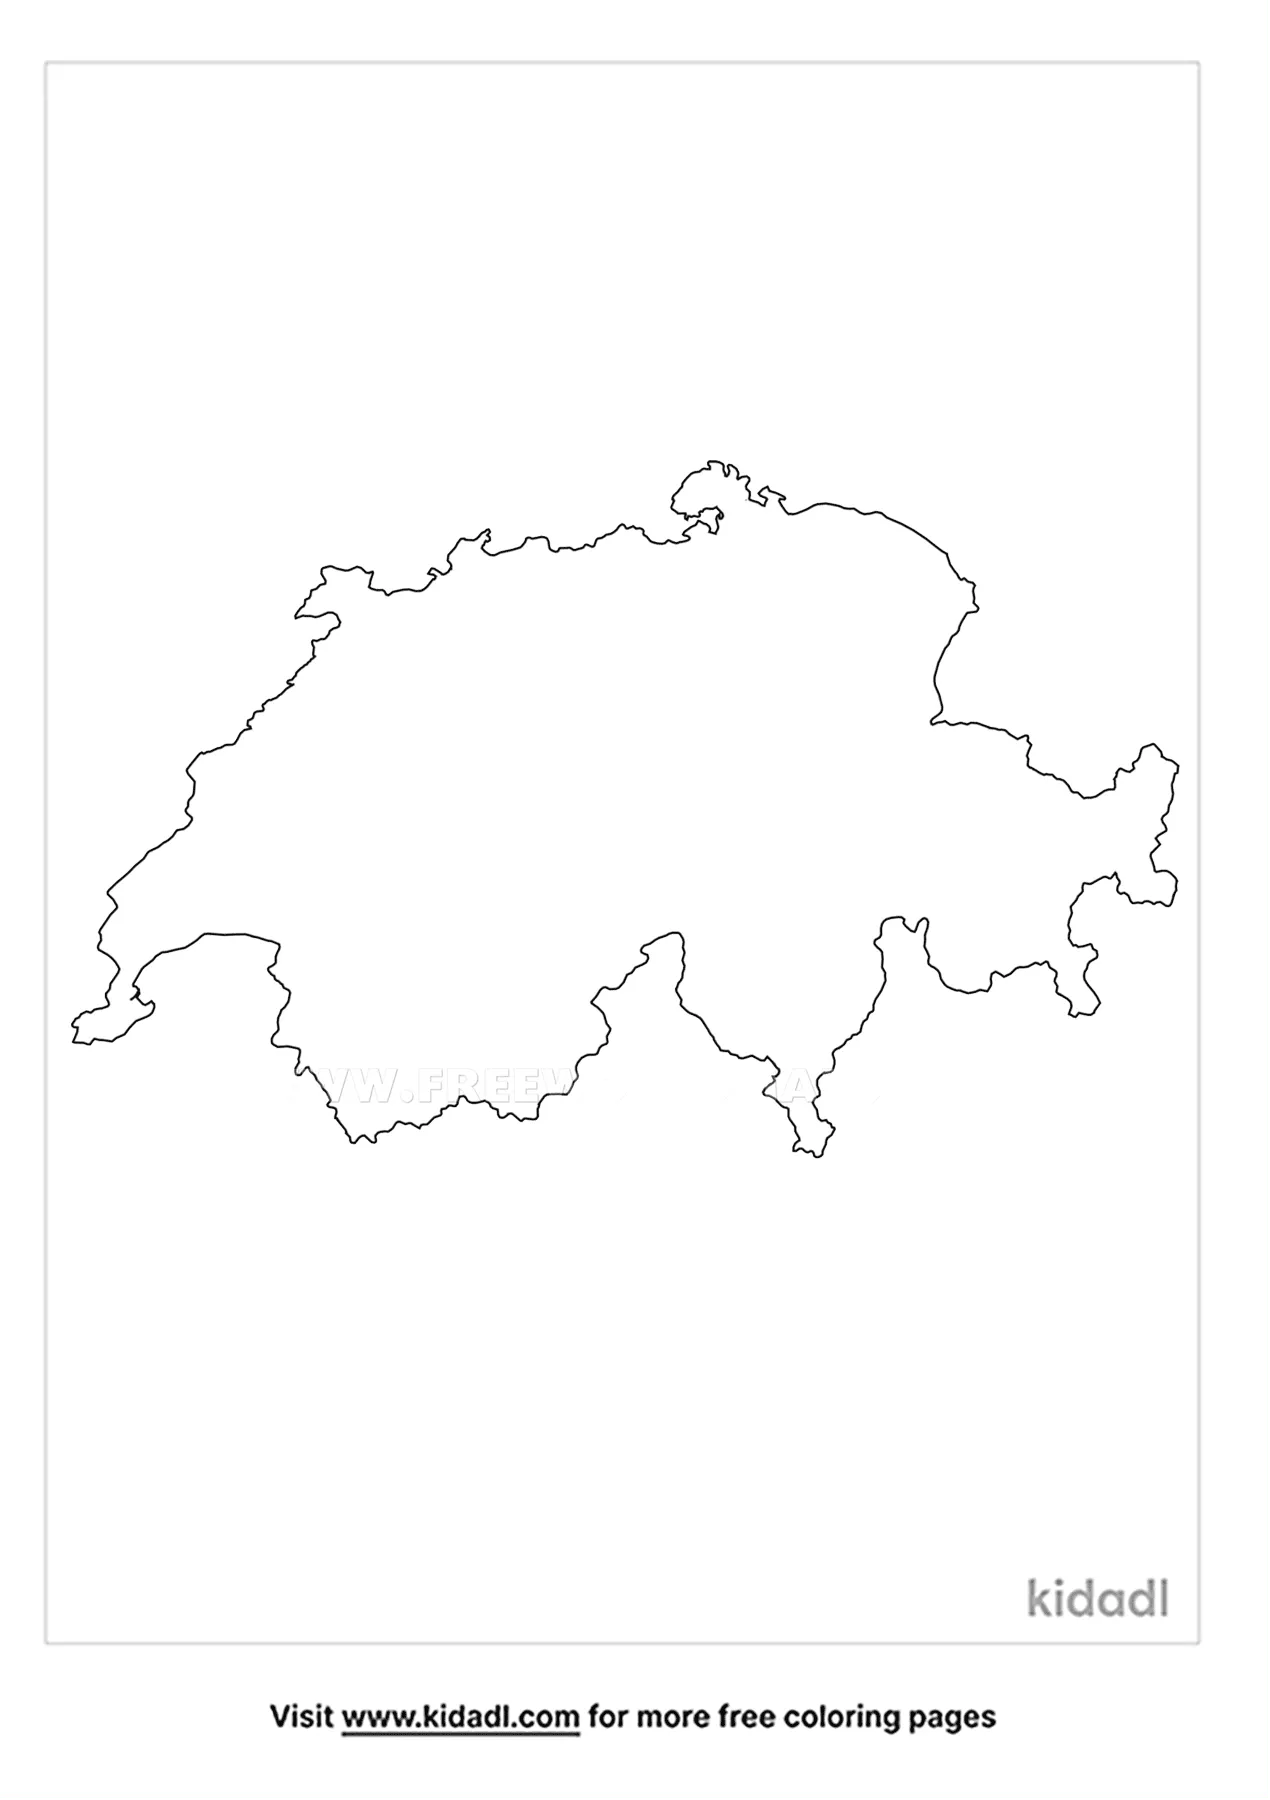 Free blank map of switzerland coloring page coloring page printables